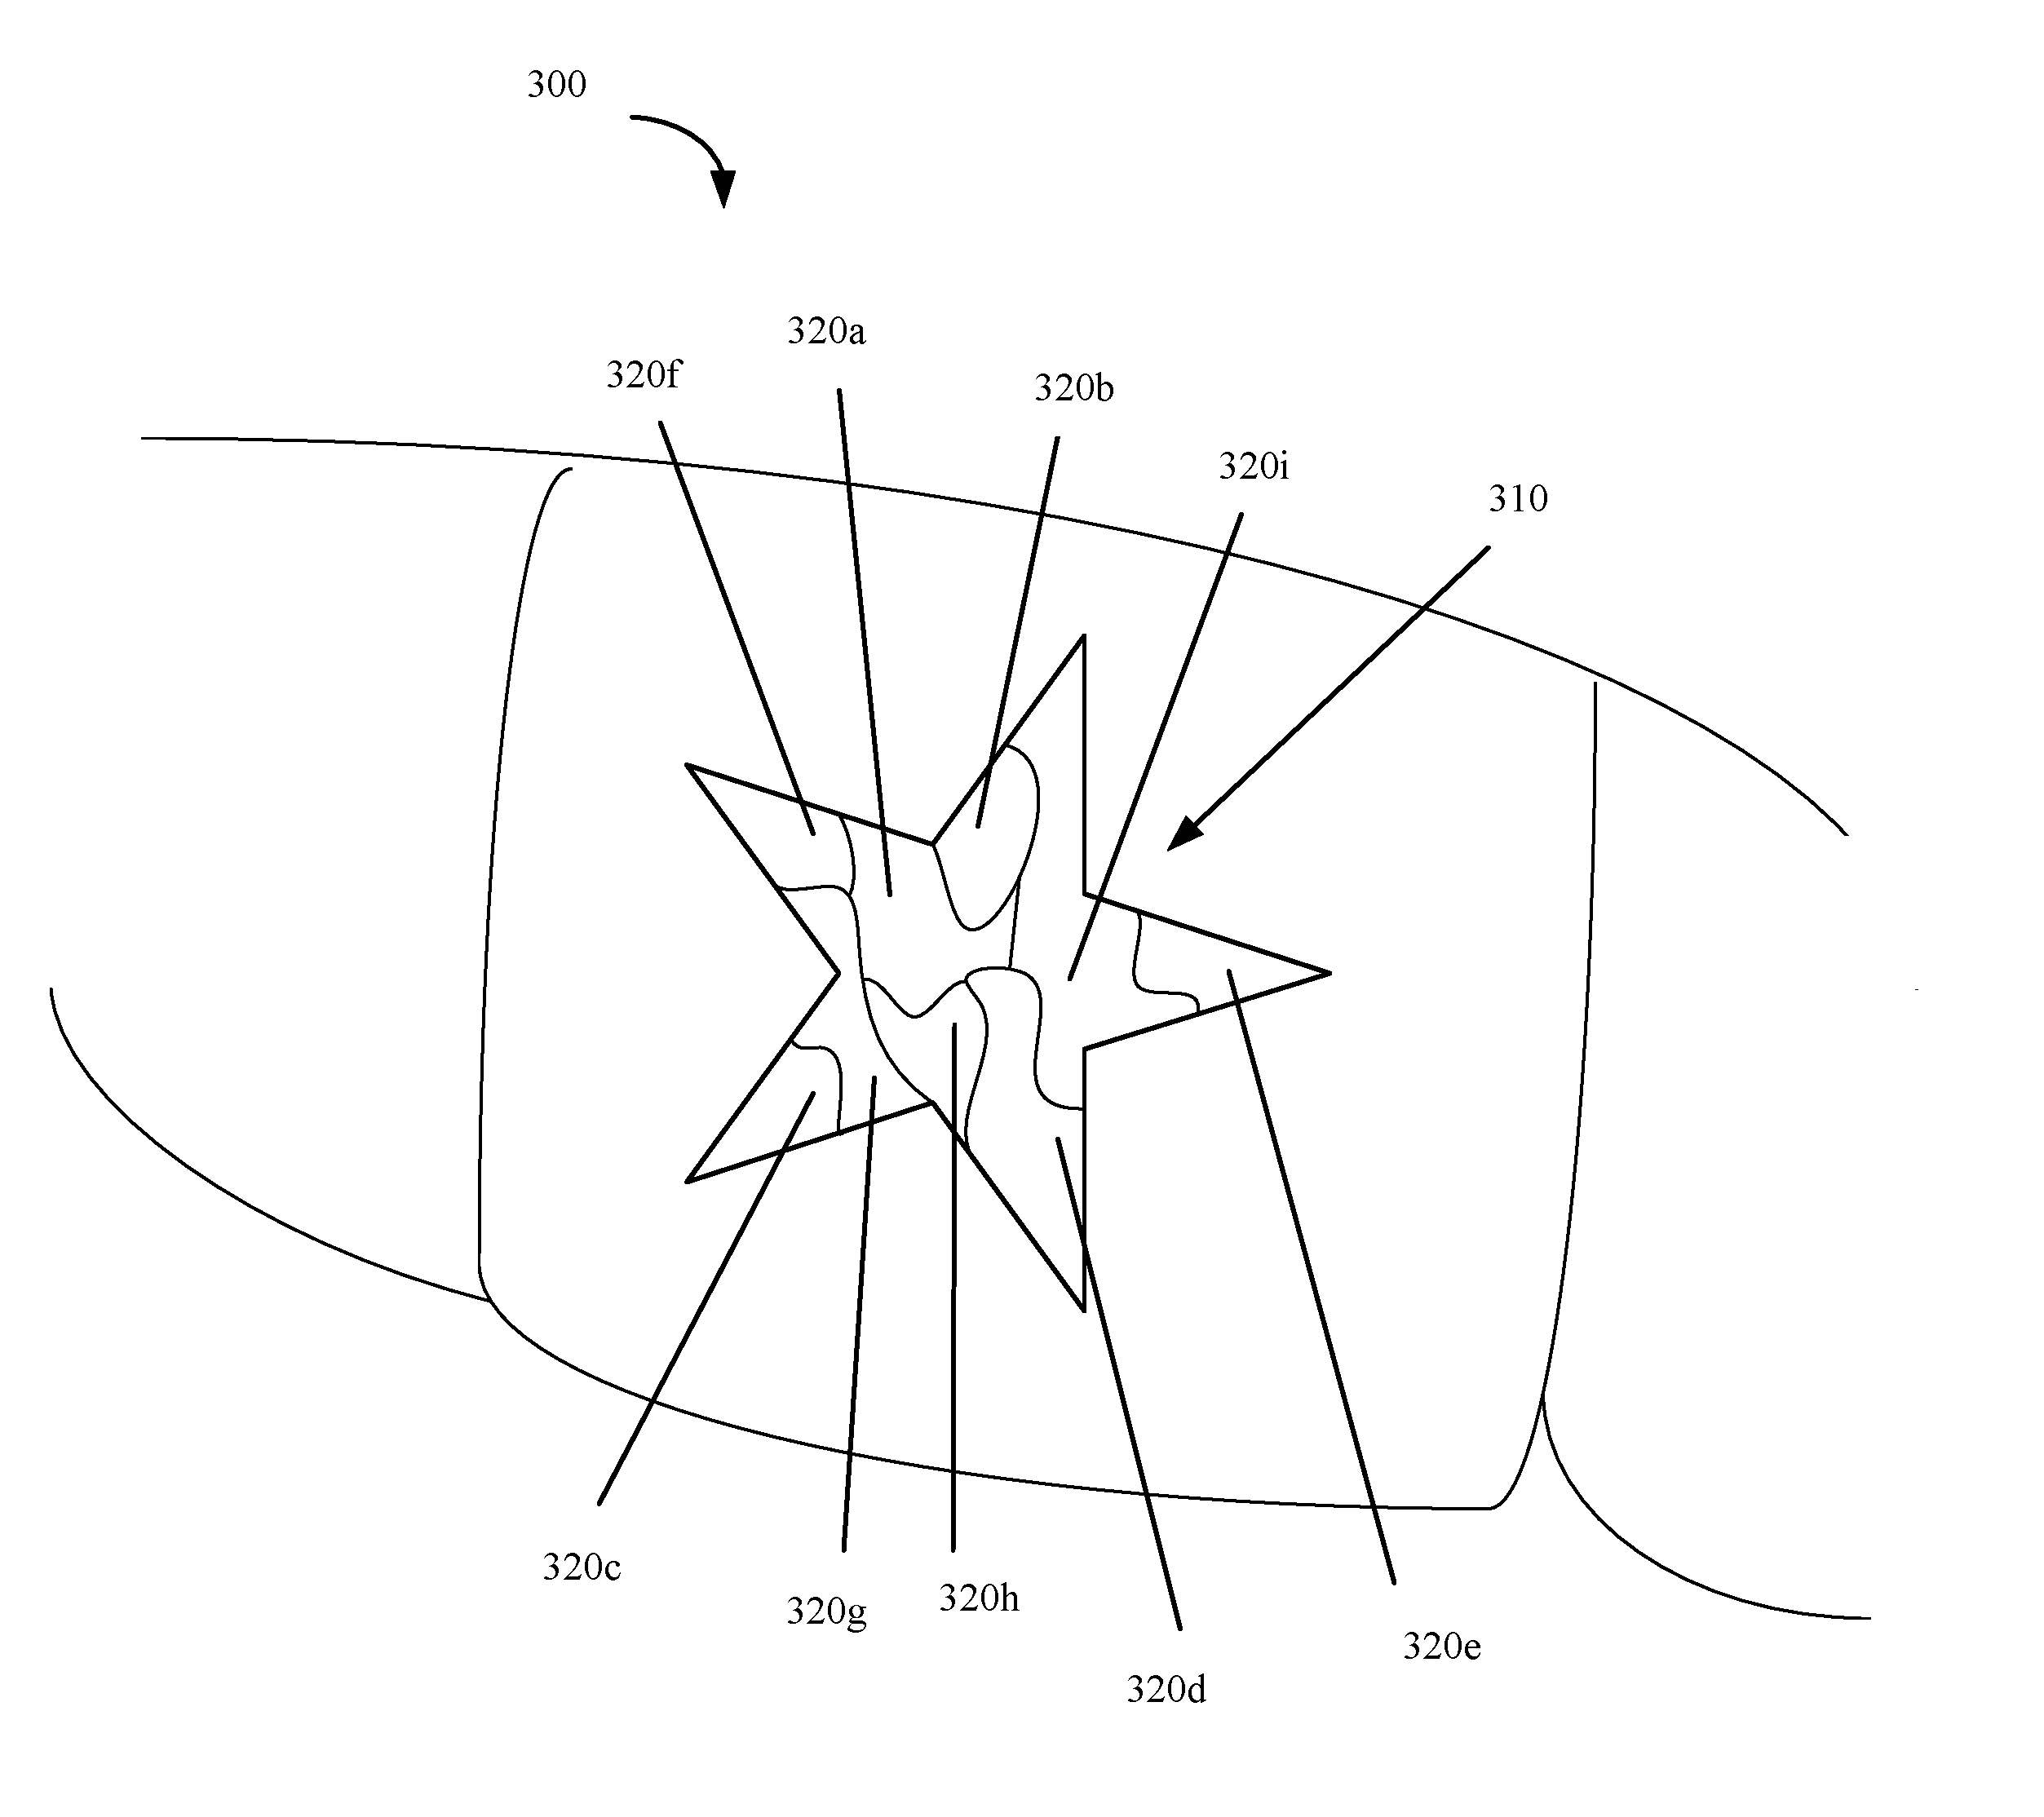 Systems, apparatuses and methods for substance delivery from dental appliance